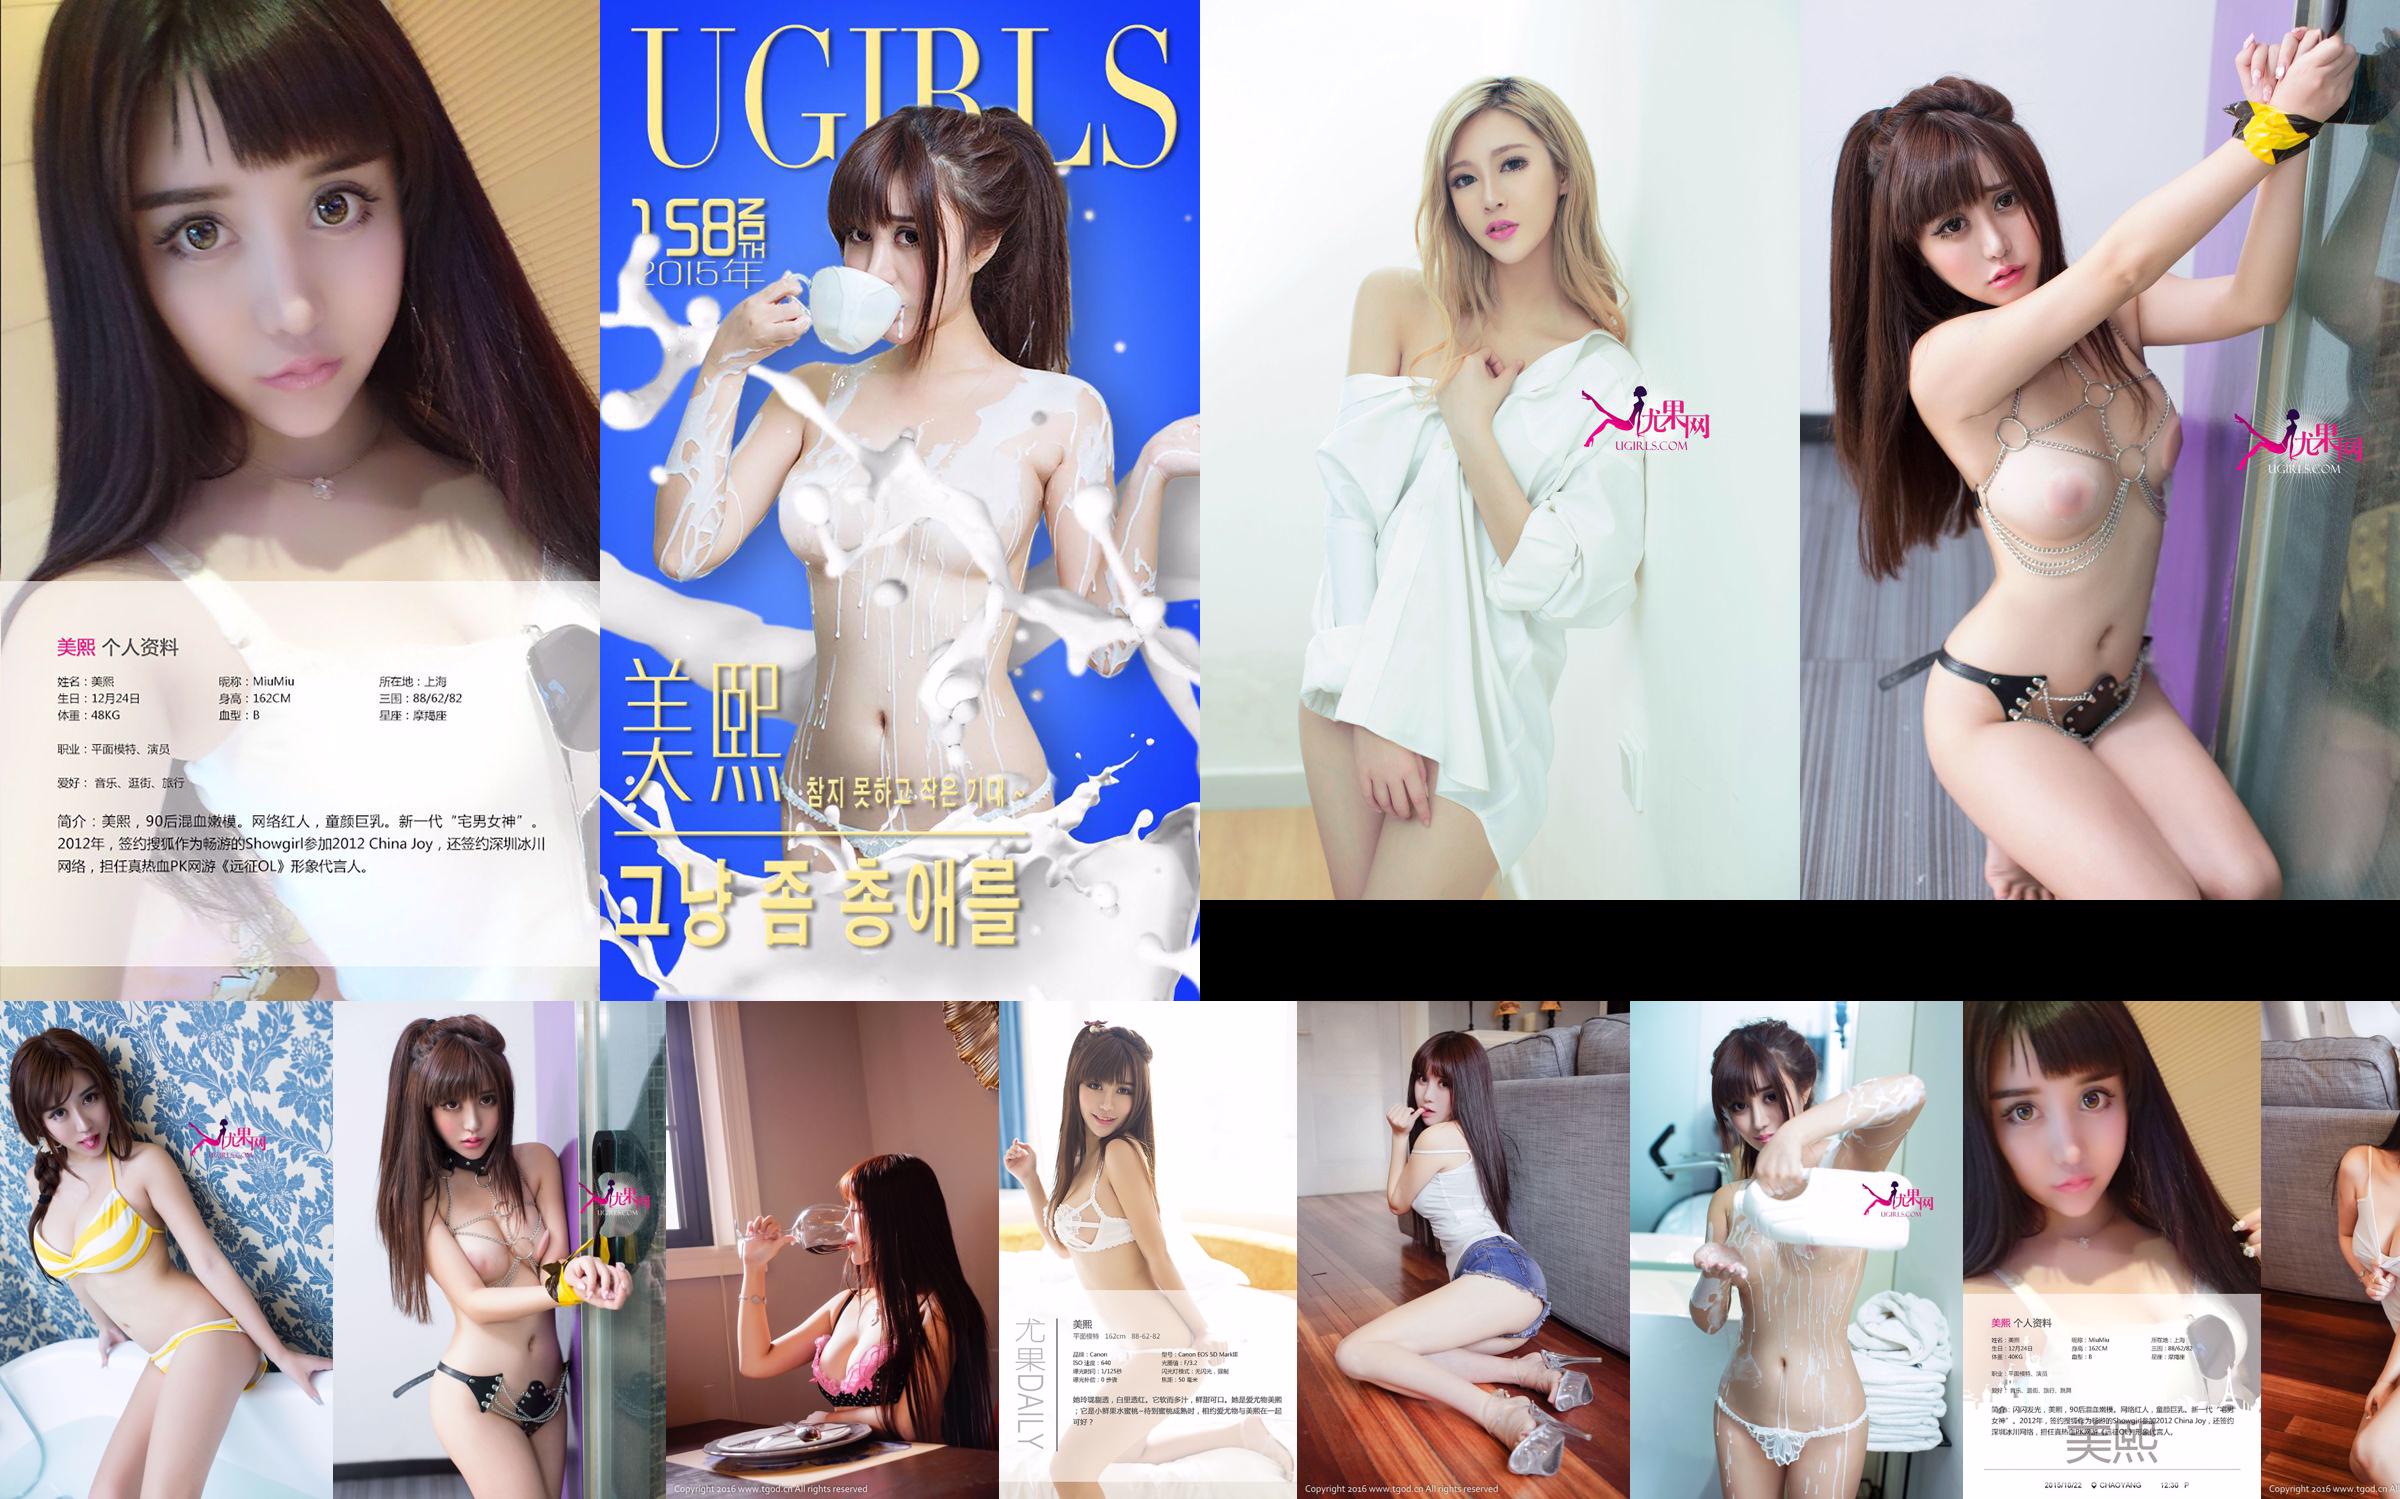 Miu Miu "The Little Expectation That Can't Be Held" [Love Youwu Ugirls] No.158 No.5d7c95 Page 1